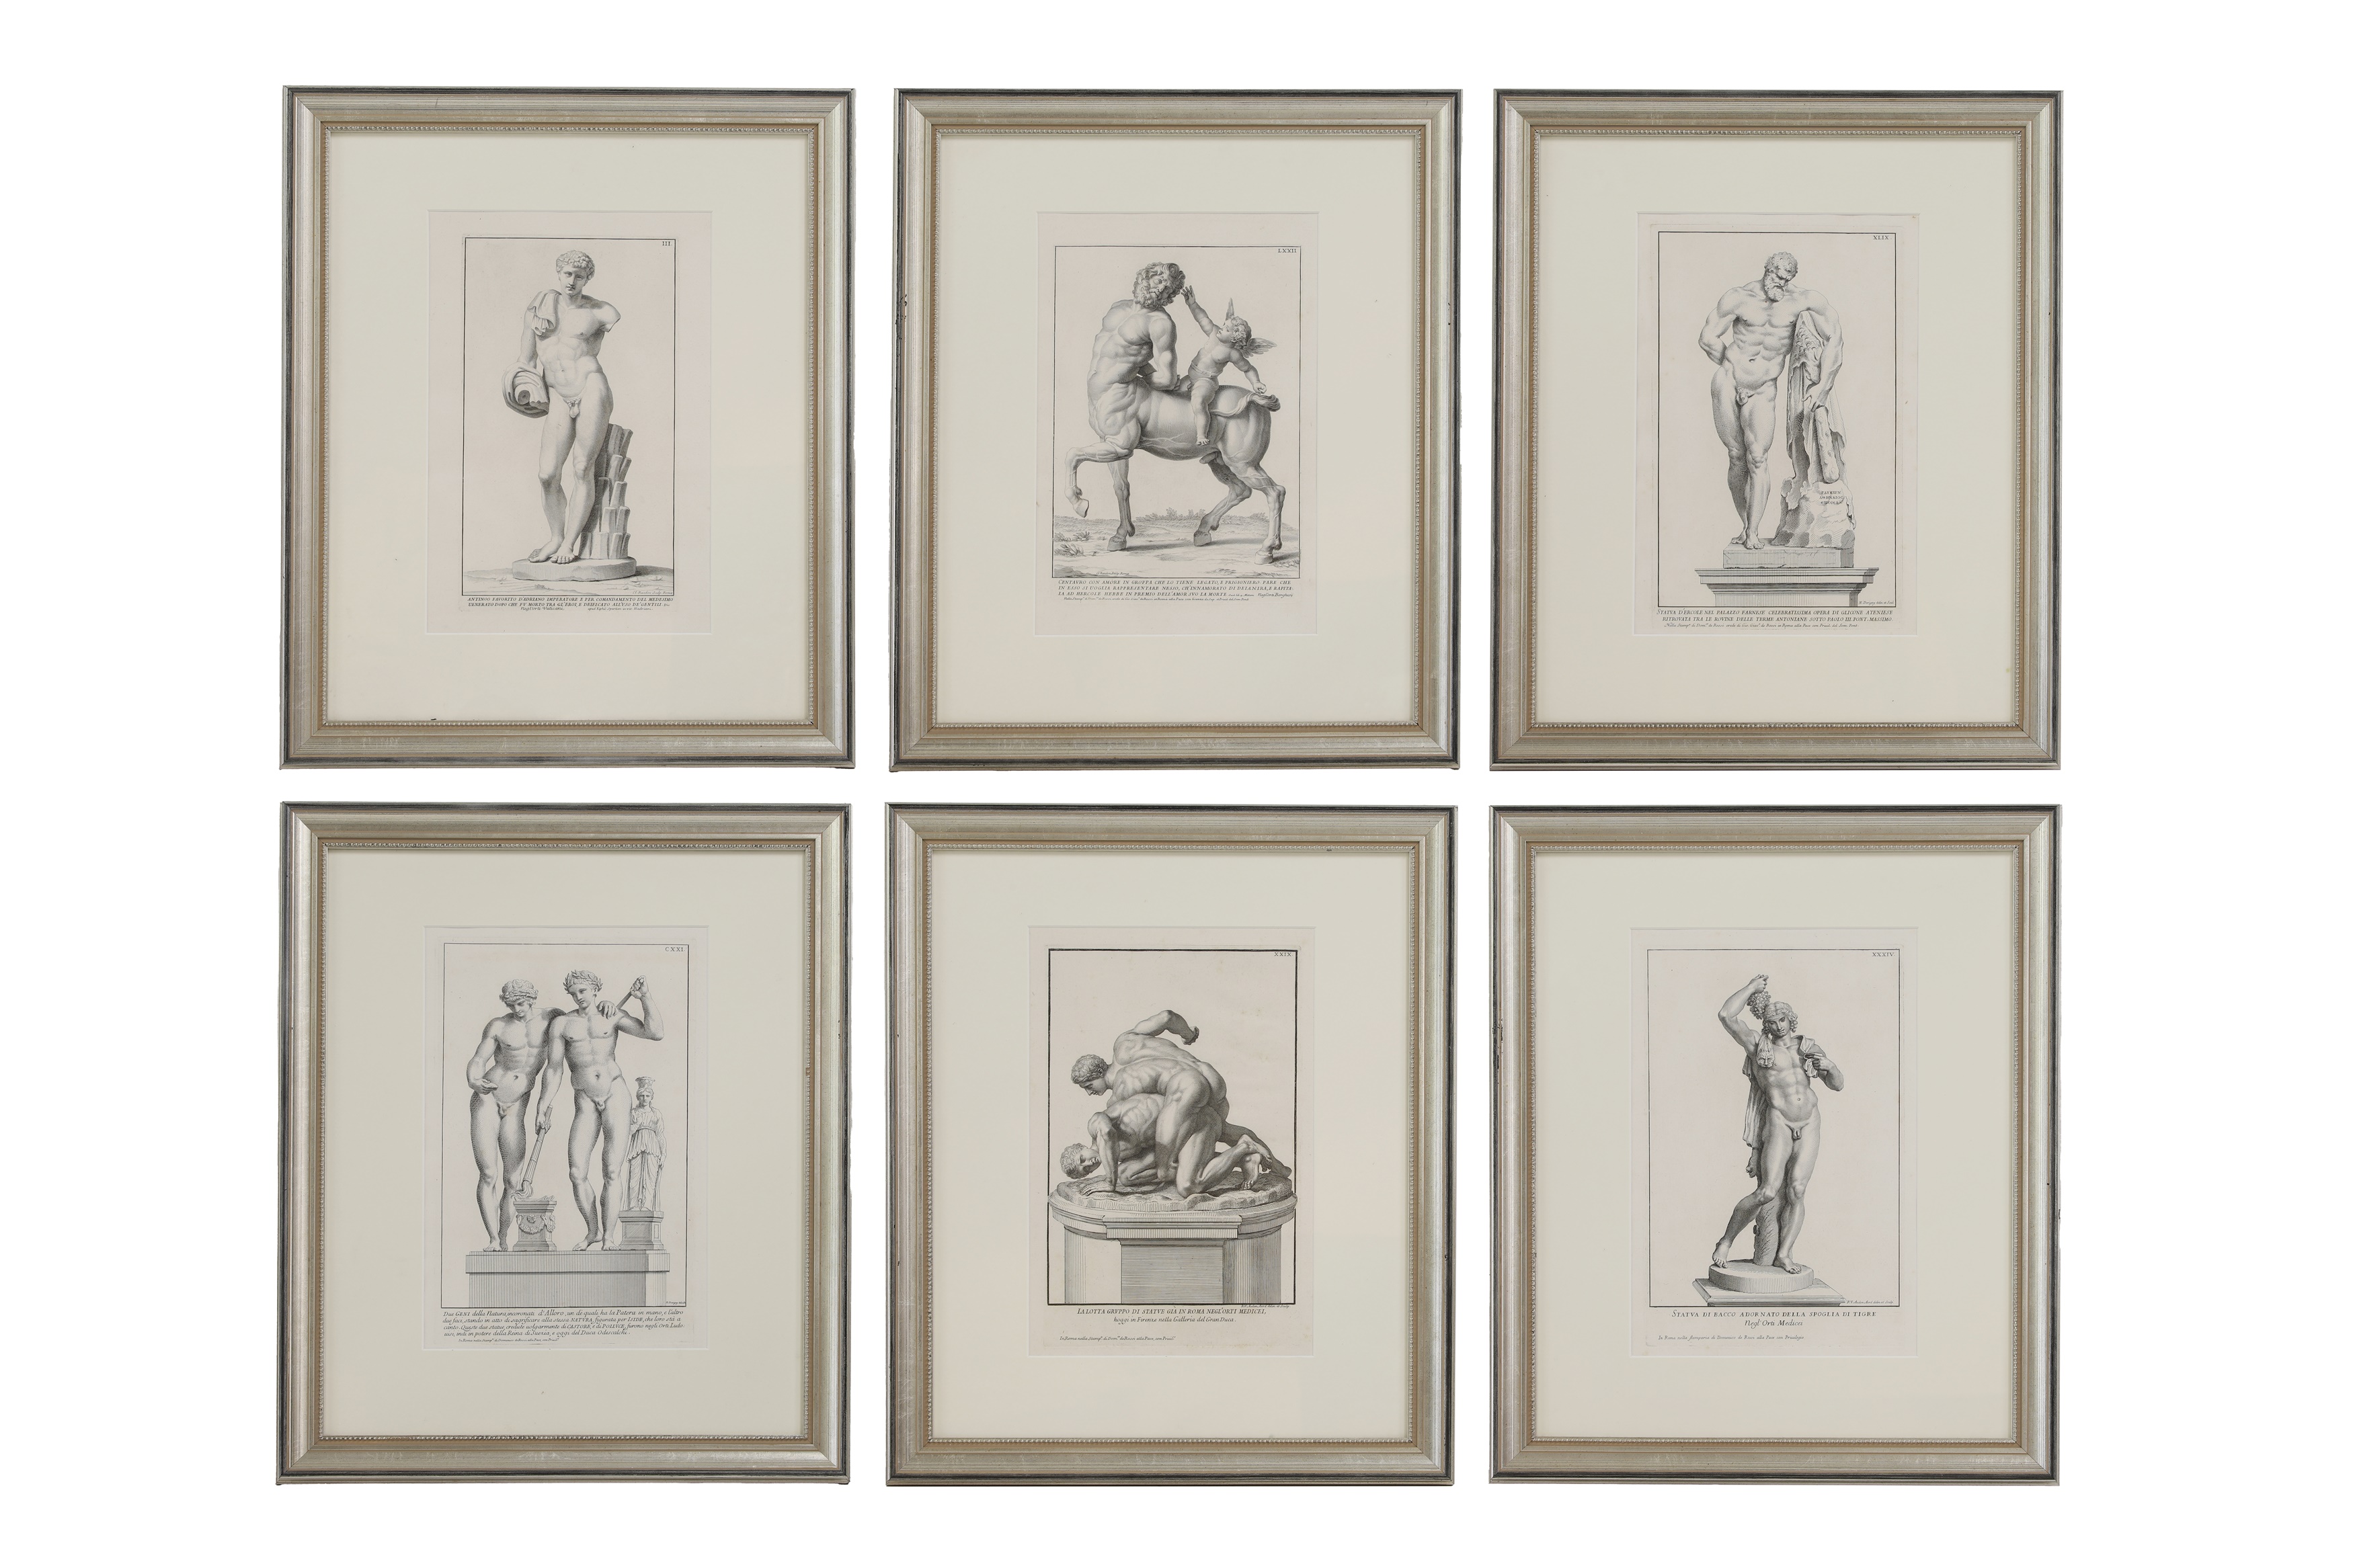 A set of six engravings of classical statues, 18th century, Italian, from Domenico Rossi, 'Raccolta di statue antiche e moderne', each numbered and titled, plate 34 x 21cm, each later mounted in cream card slips and glazed silvered frames (6) (£600-800)